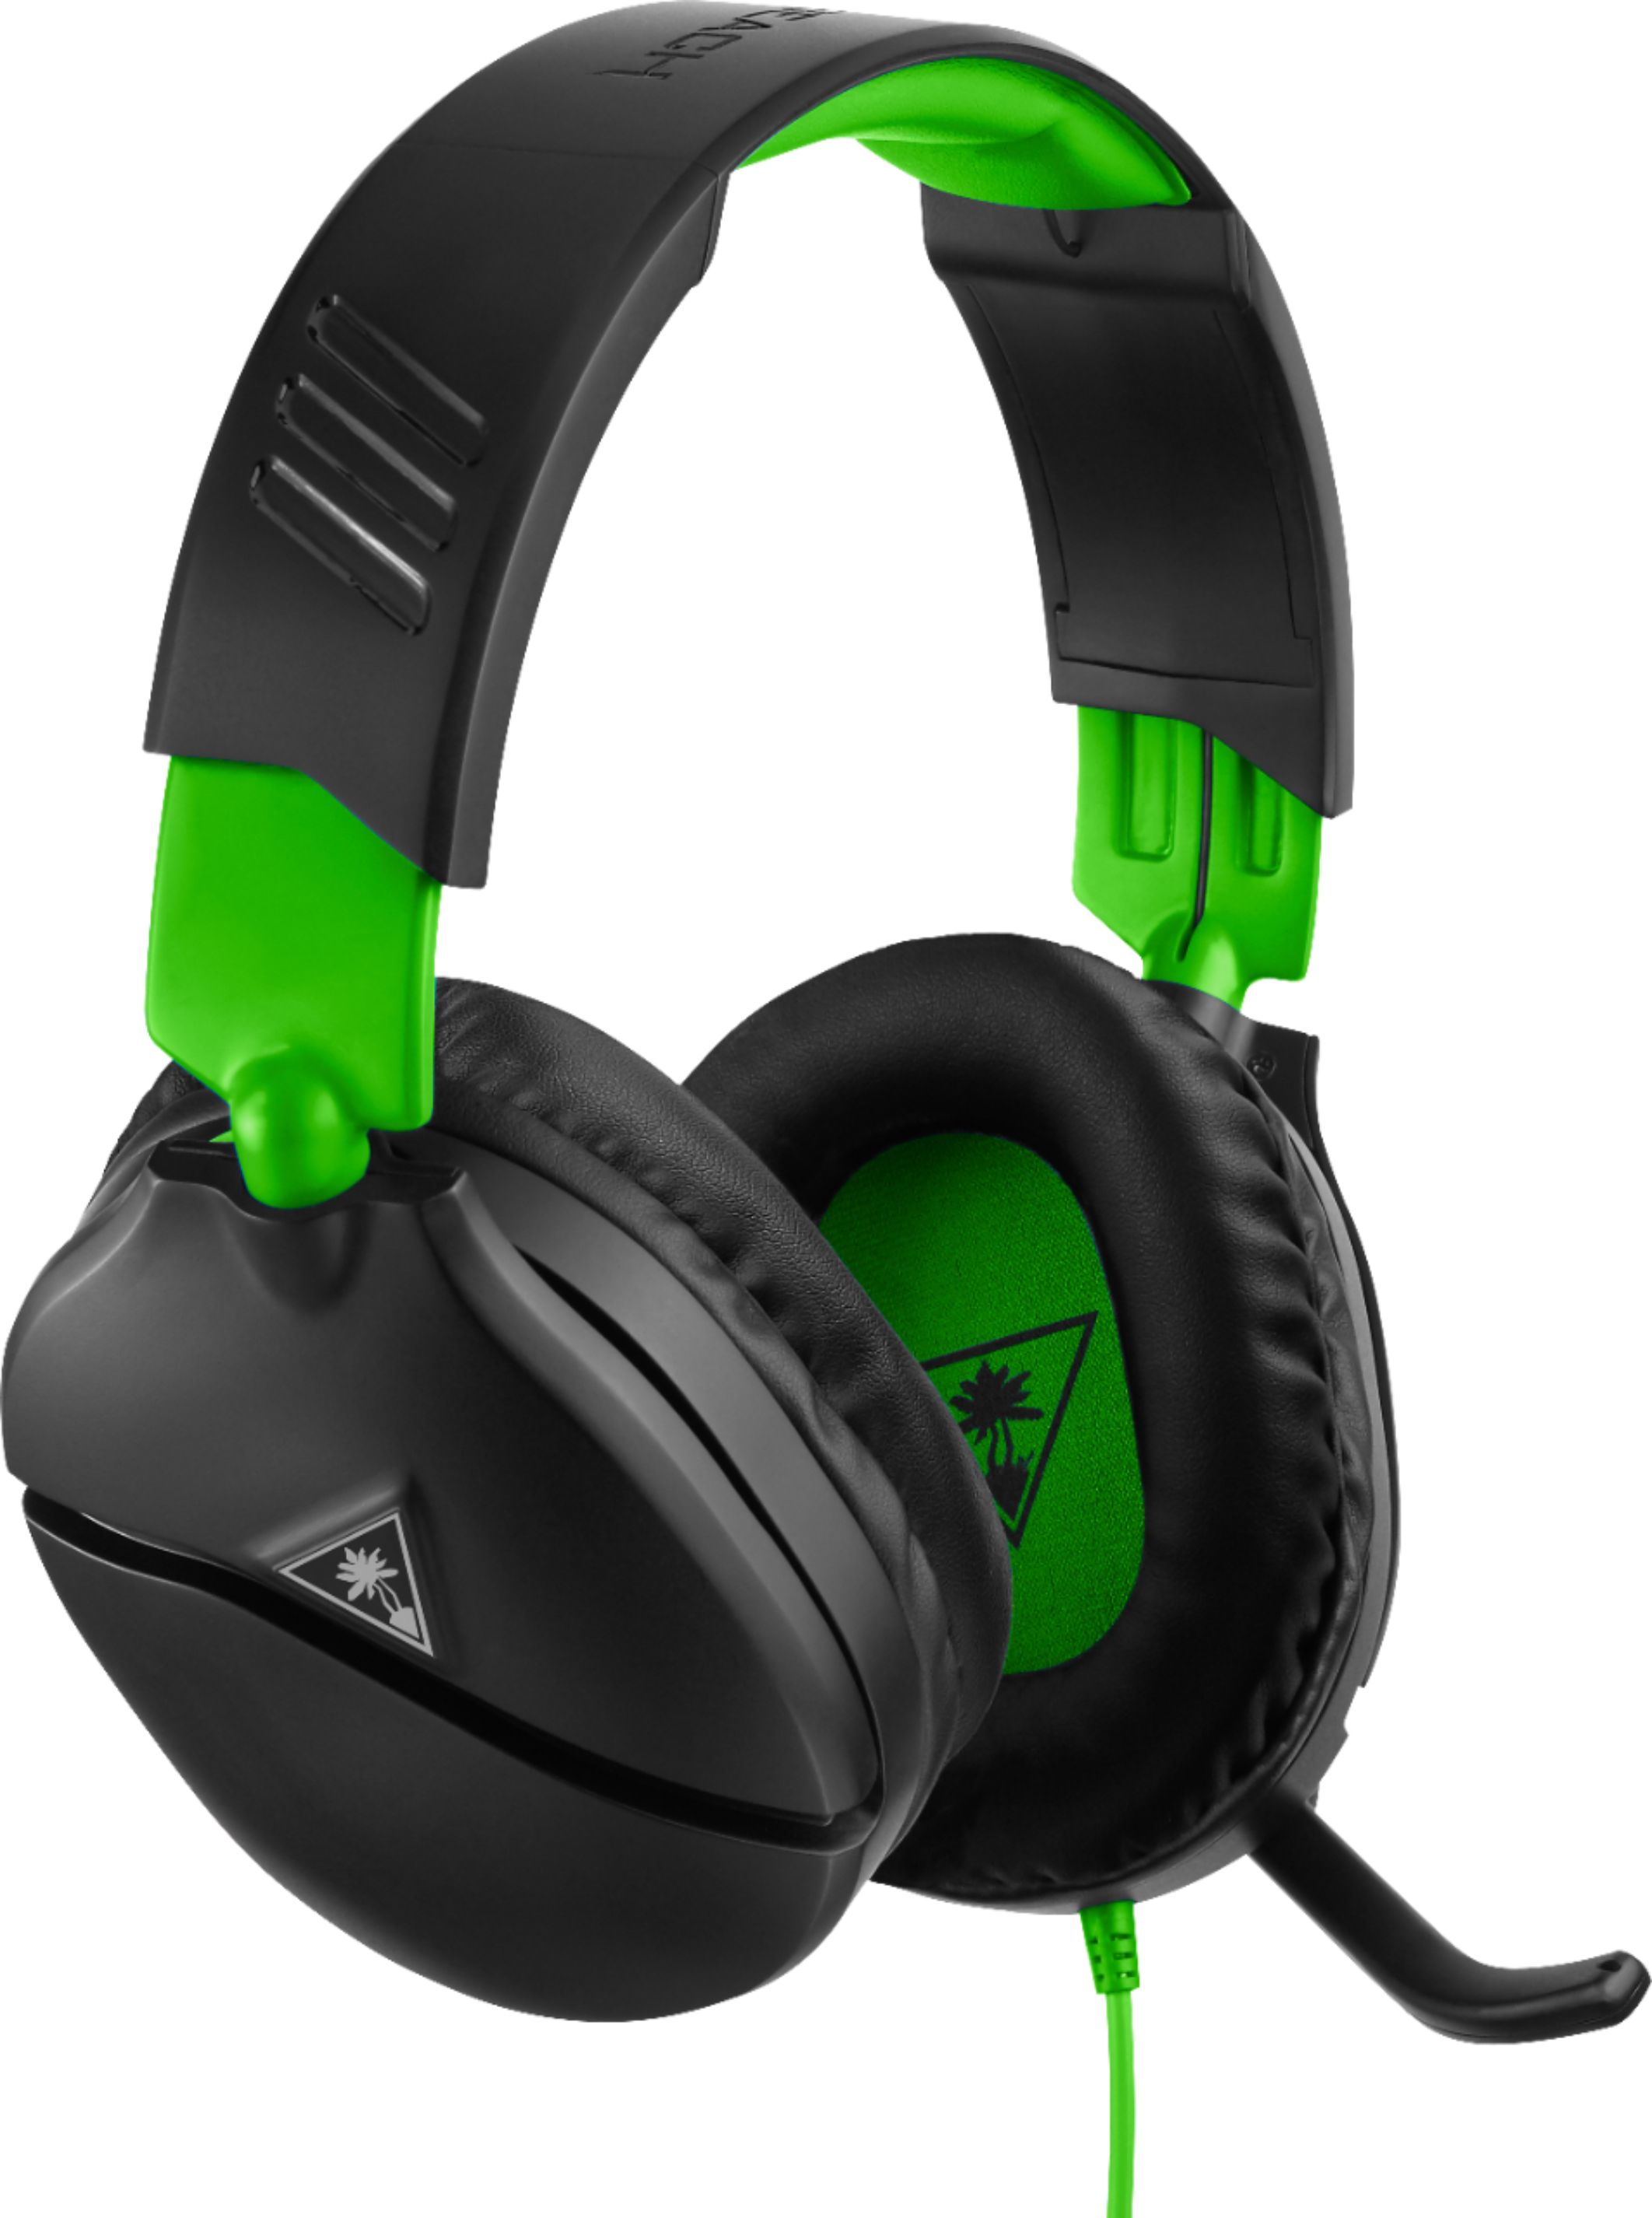 Hermano Grillo Glosario Turtle Beach Recon 70 Wired Surround Sound Ready Gaming Headset for Xbox One  and Xbox Series X|S Black/Green TBS-2555-01 - Best Buy